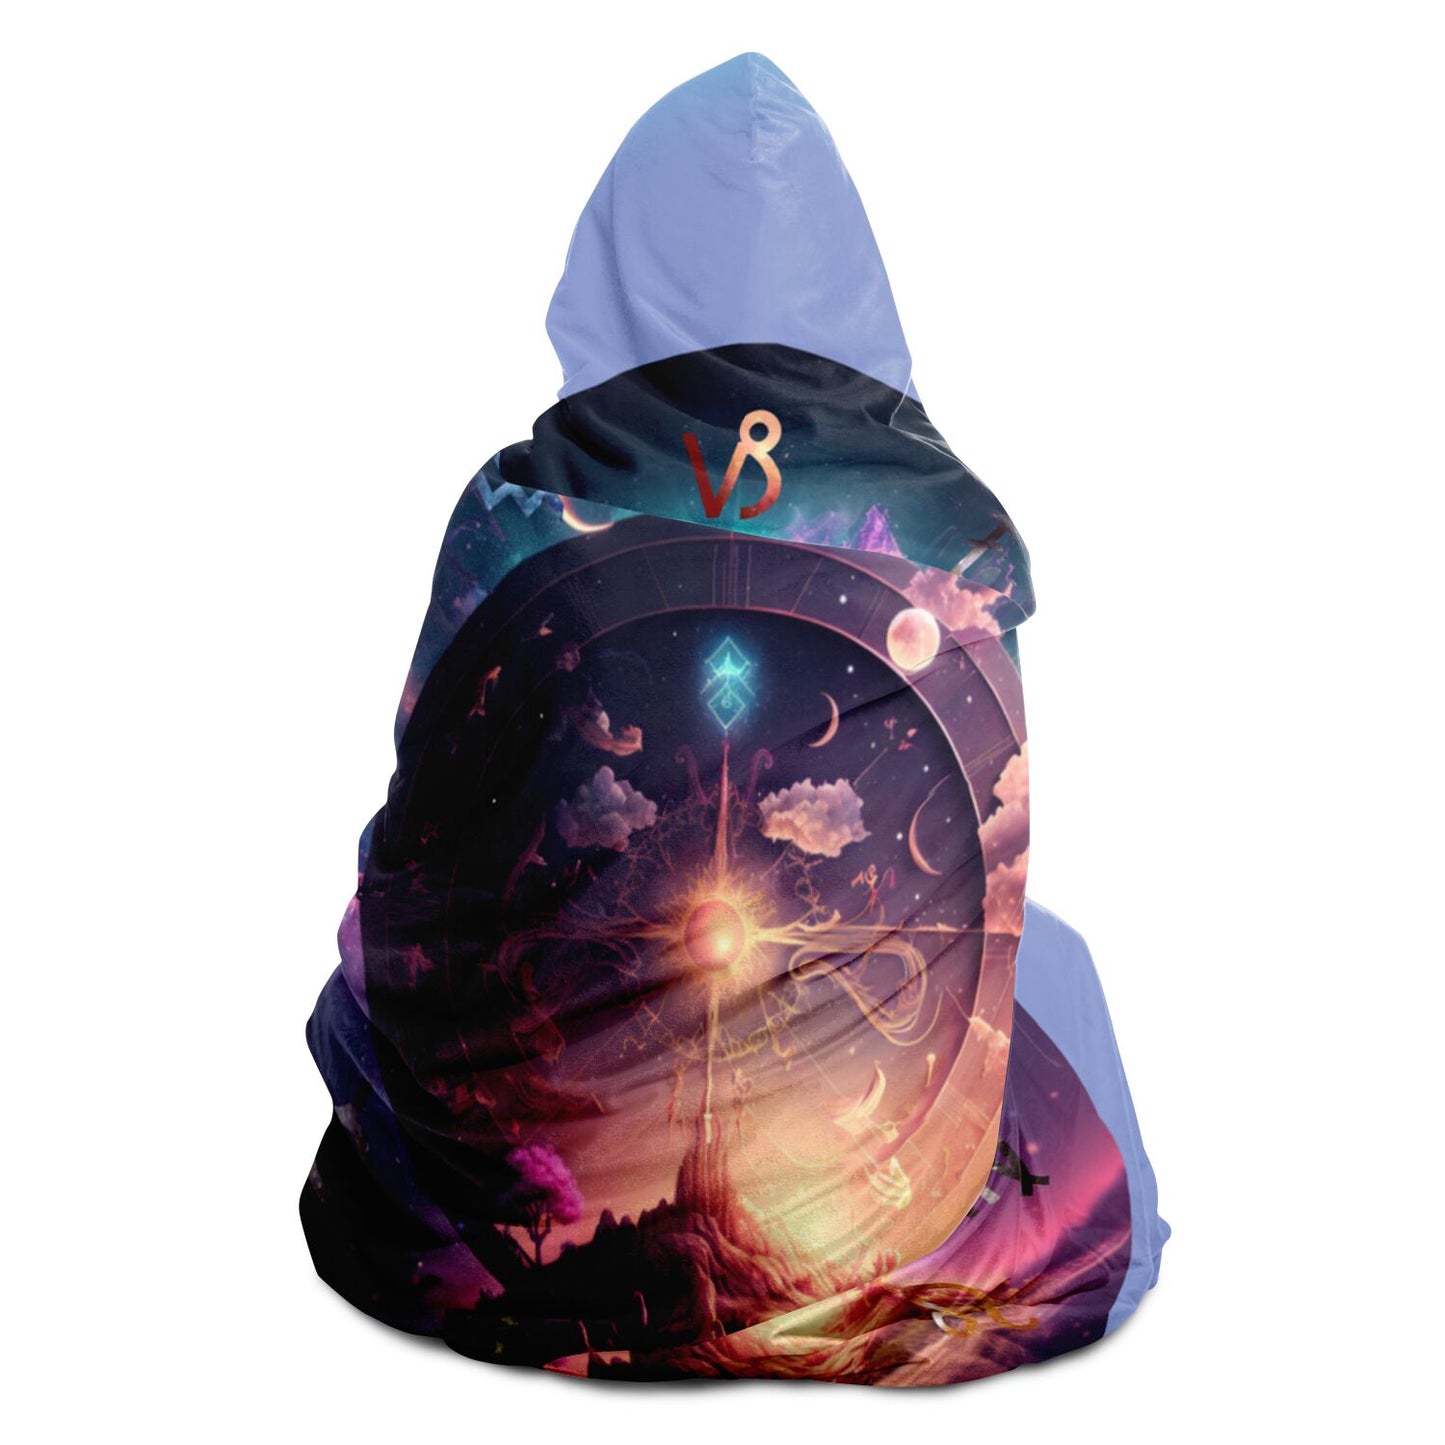 Zodiac Symbols Around Celestial Sphere with Teal Background Hooded Blanket